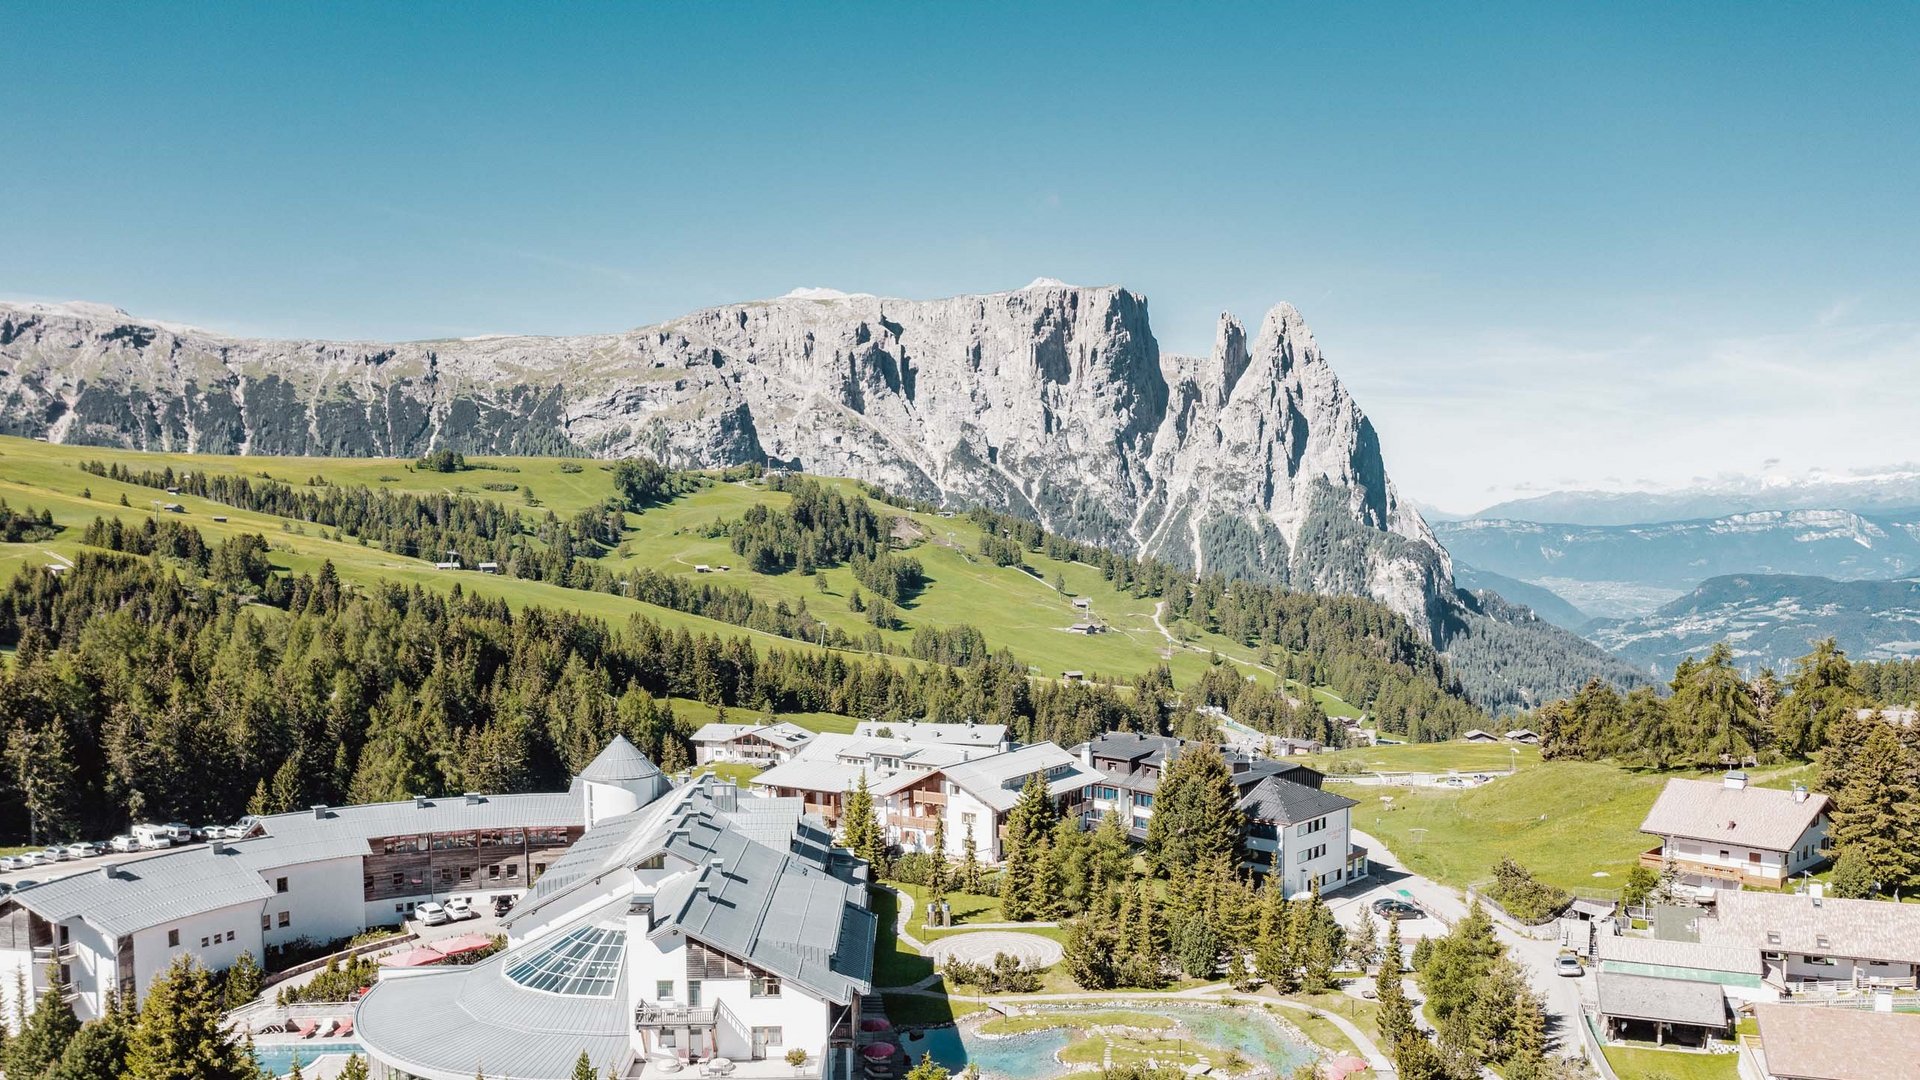 The route to your holiday. Alpe di Siusi, here we come!